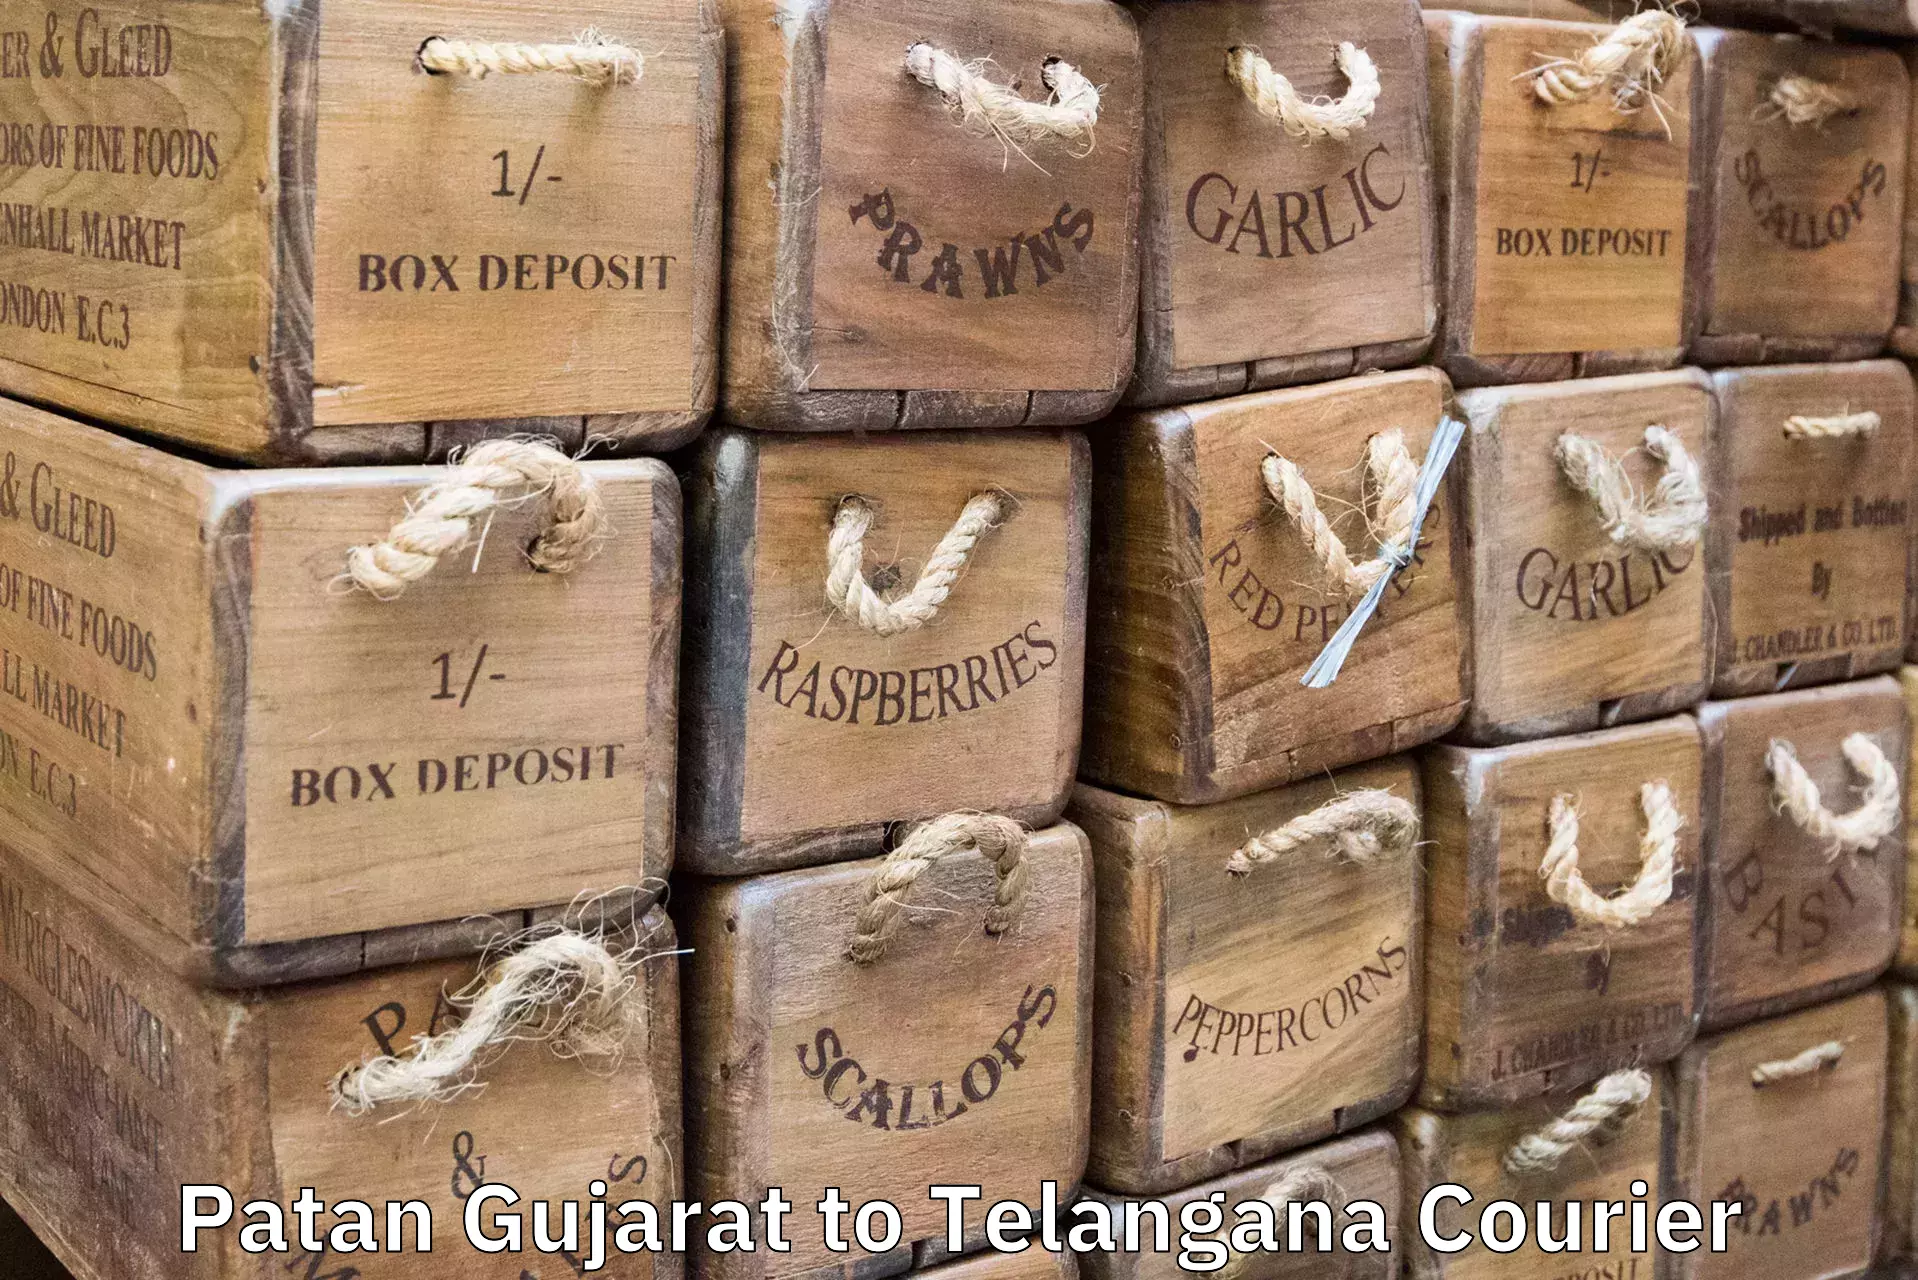 Luggage shipping specialists Patan Gujarat to Jainad